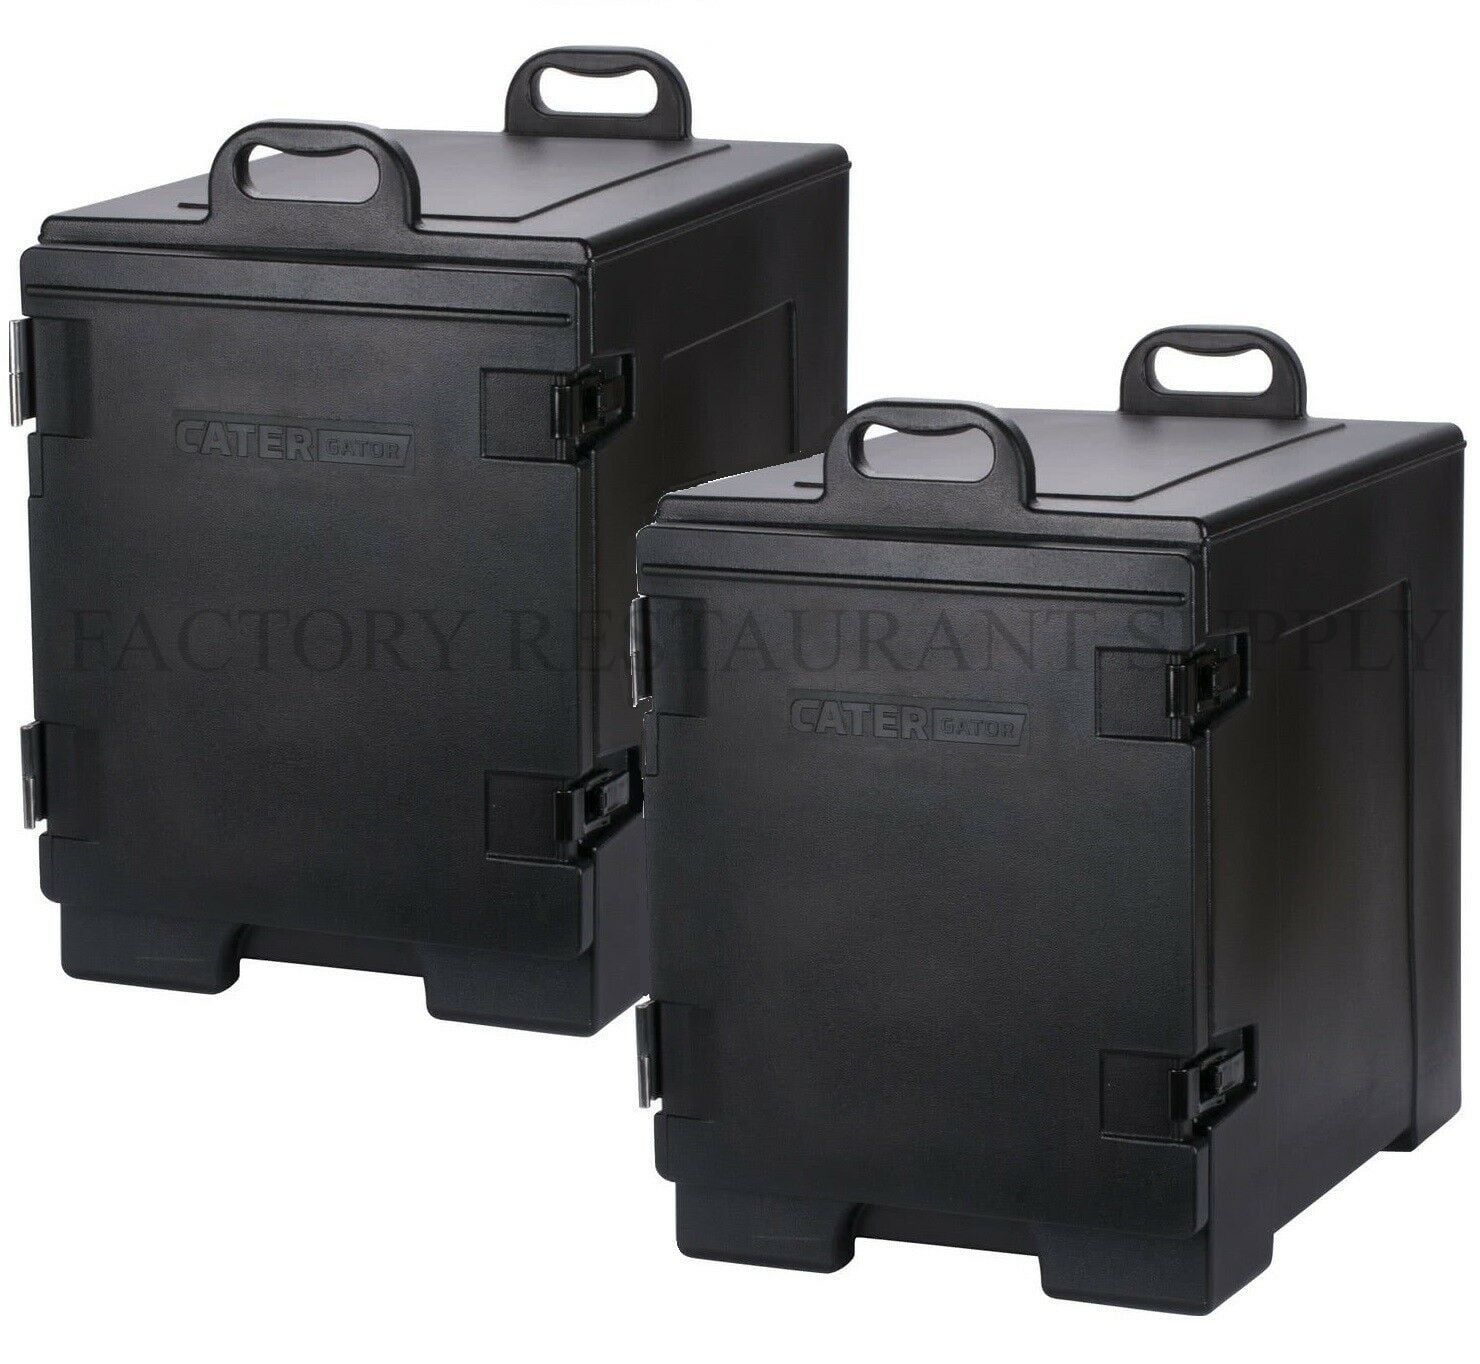 4 PACK Insulated BLACK Catering Delivery Chafing Dish Food Full Pan Carrier Bag 